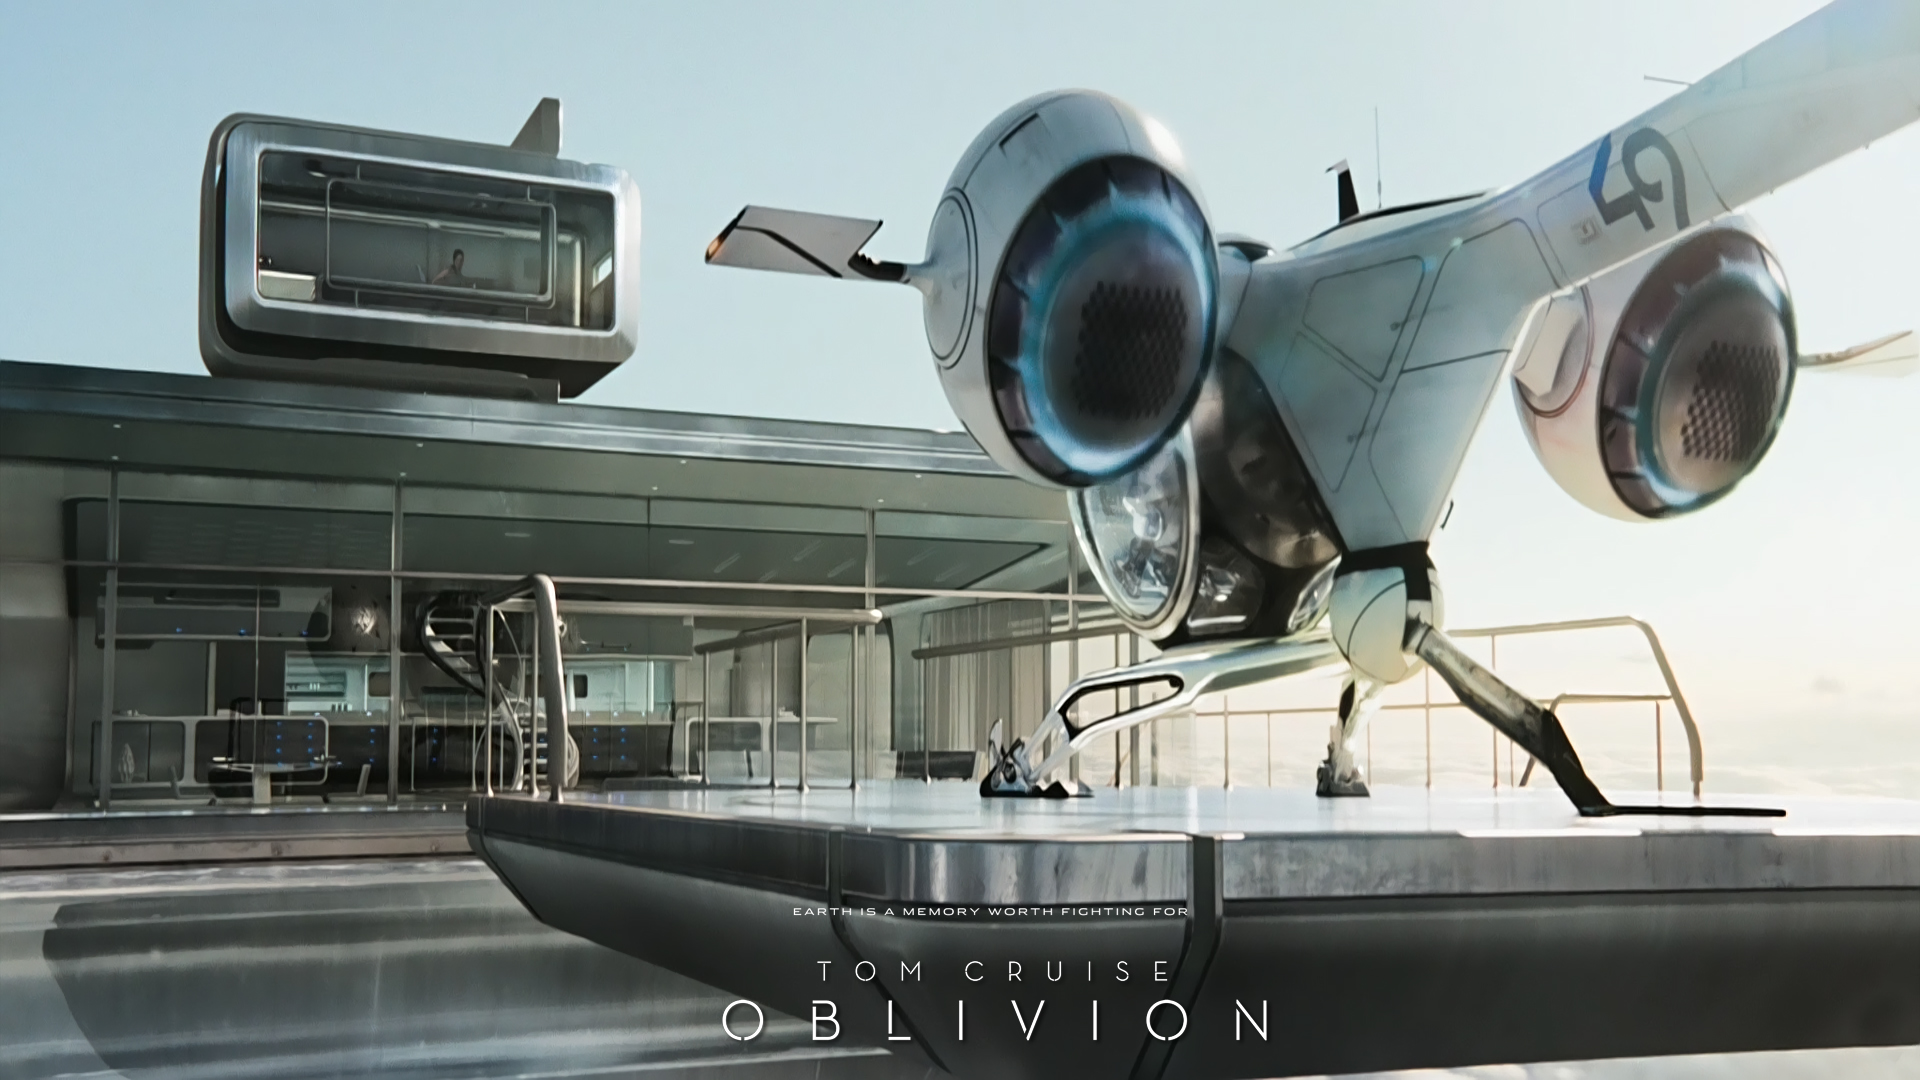 HD Wallpaper Screenshots Of Oblivion With Tom Cruise Movie